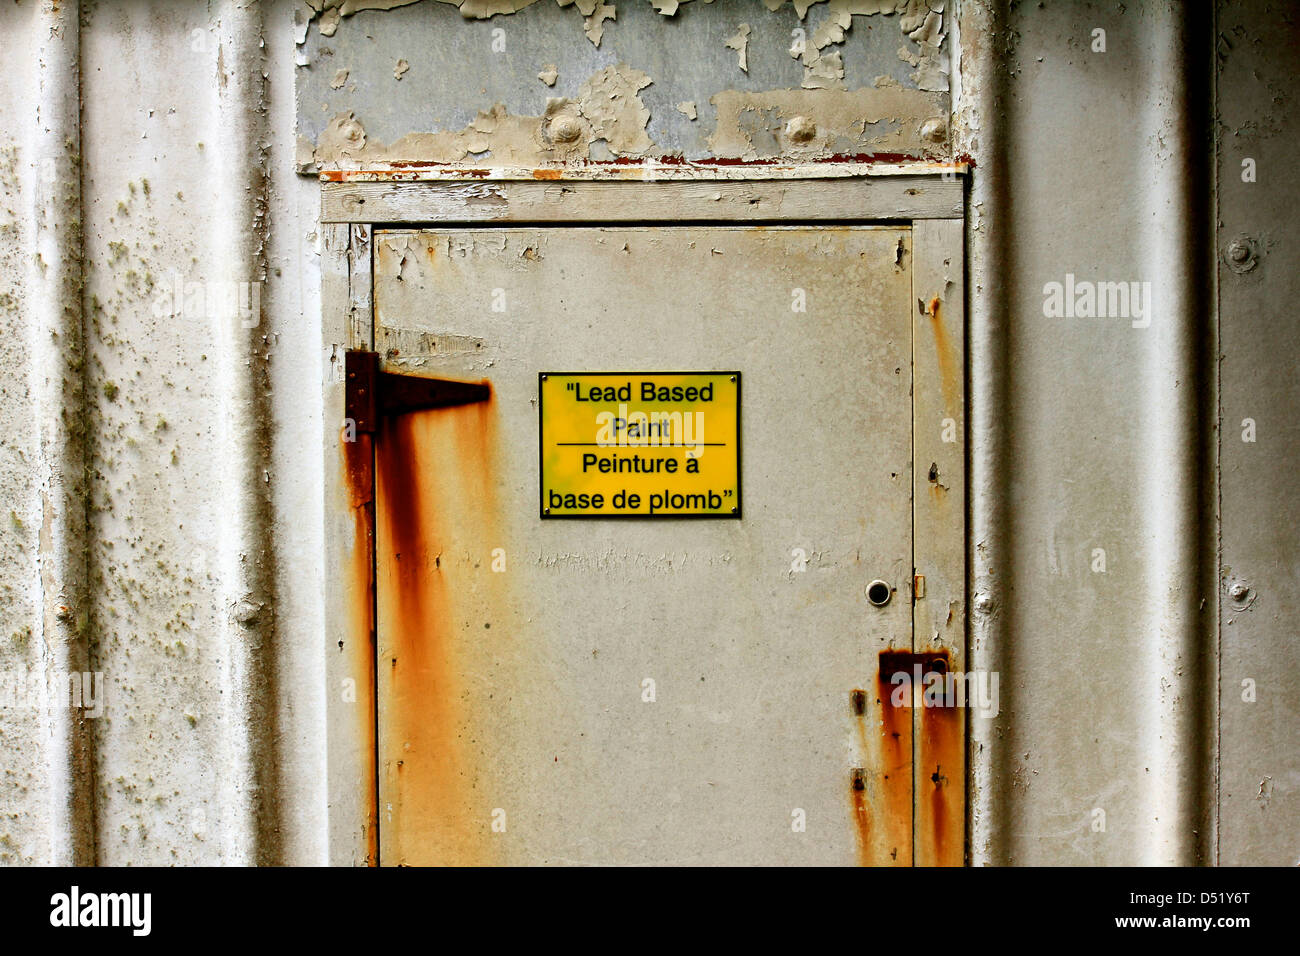 Bright yellow 'lead based paint' sign in French and English on a door with rusty hinges and peeling paint Stock Photo